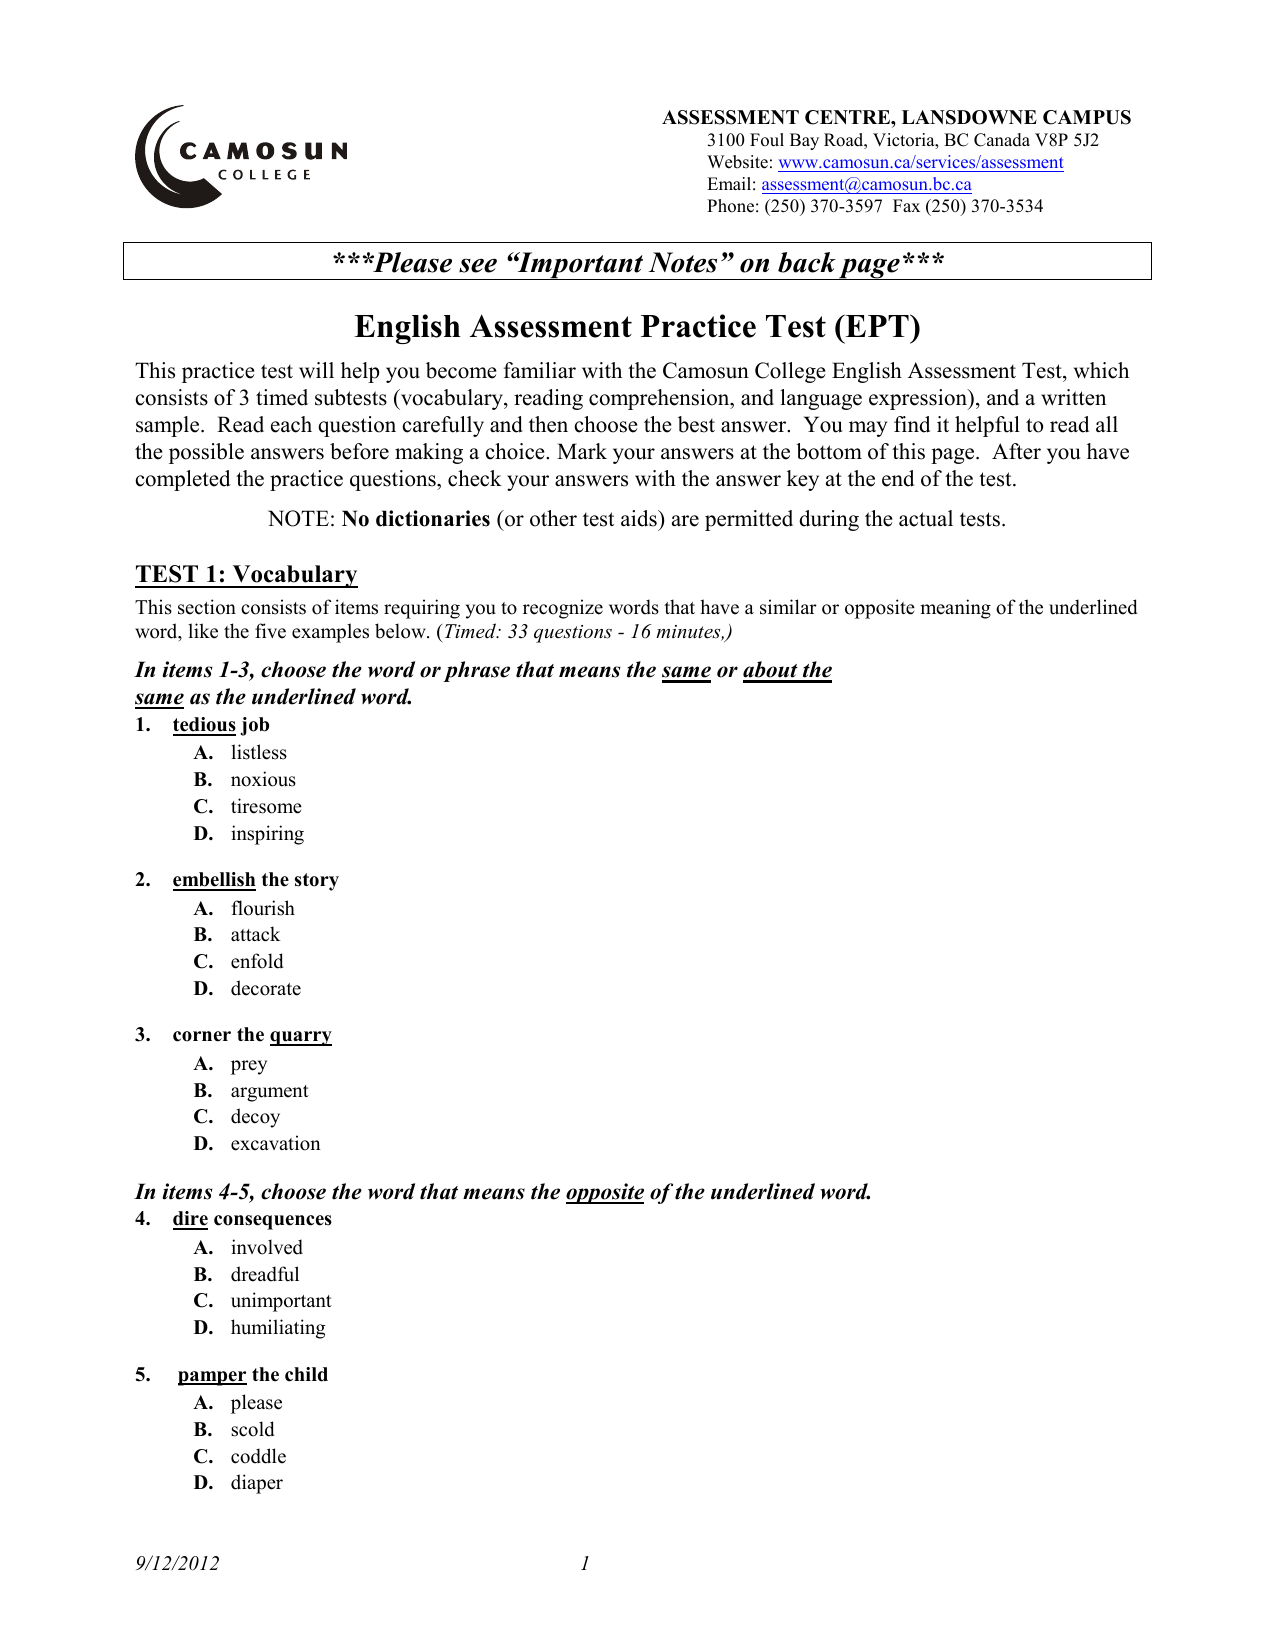 English Assessment Practice Test (EPT)